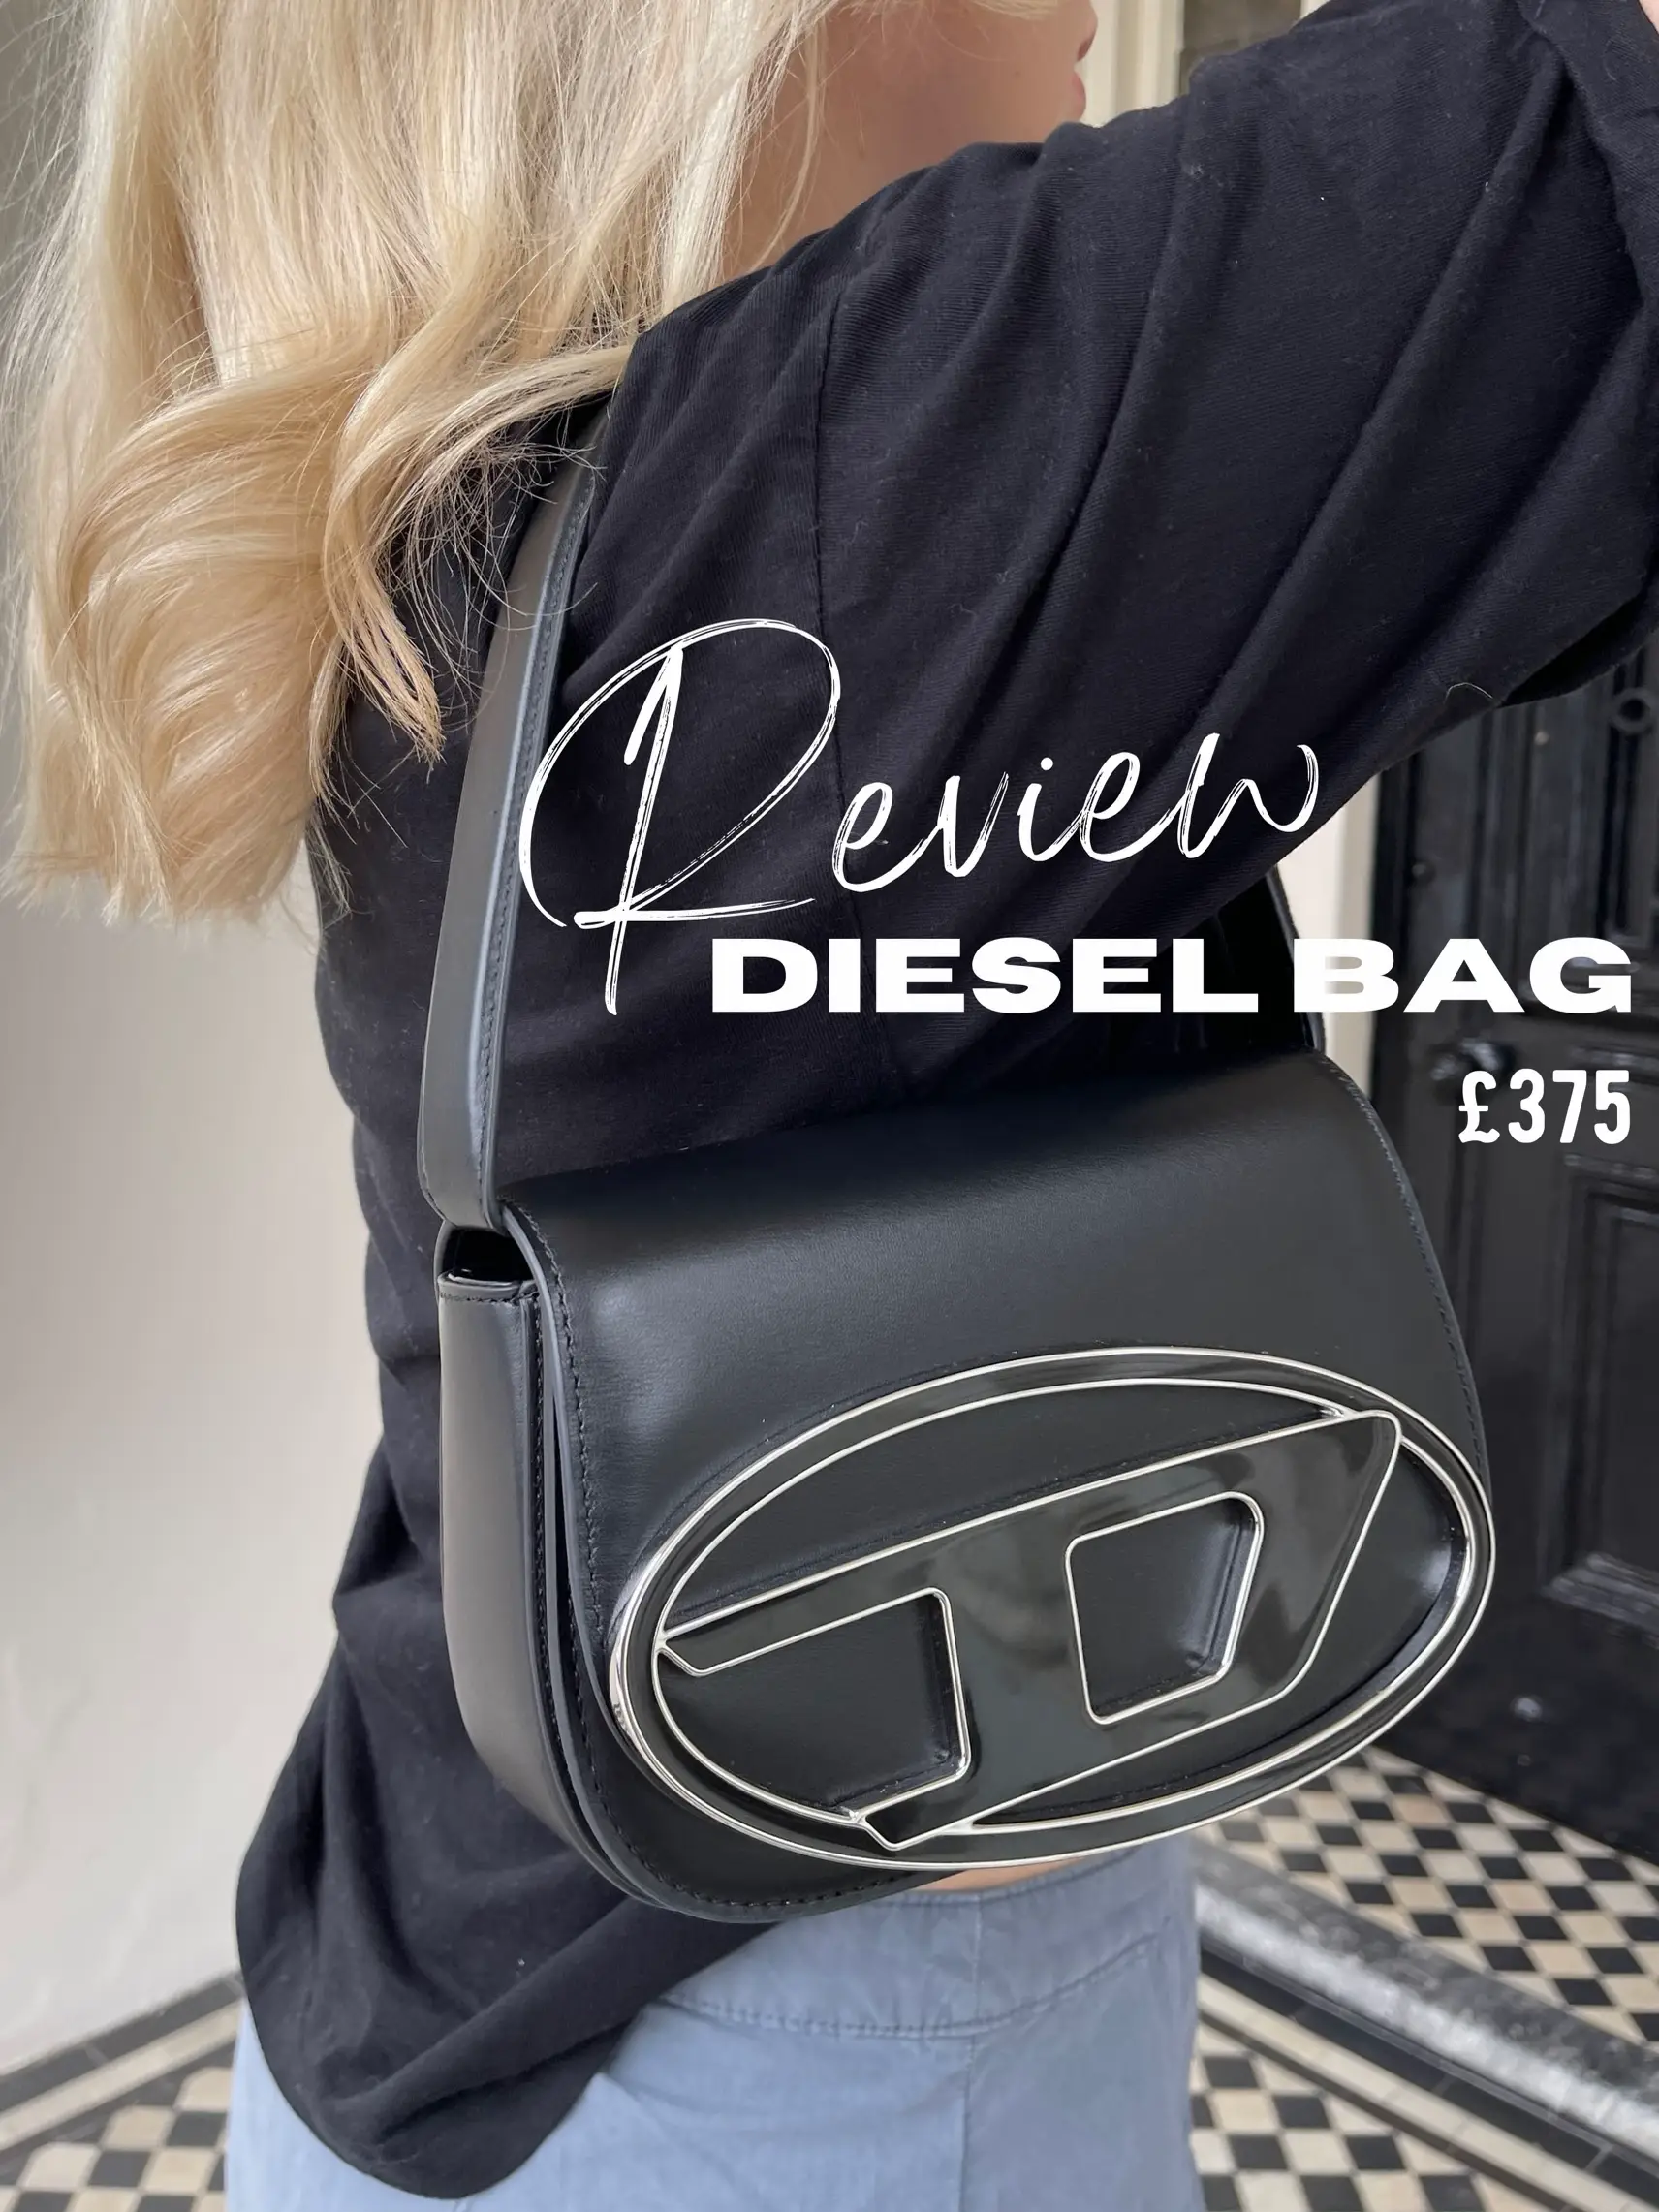 Review of Diesel Bag - is it worth it? | Gallery posted by